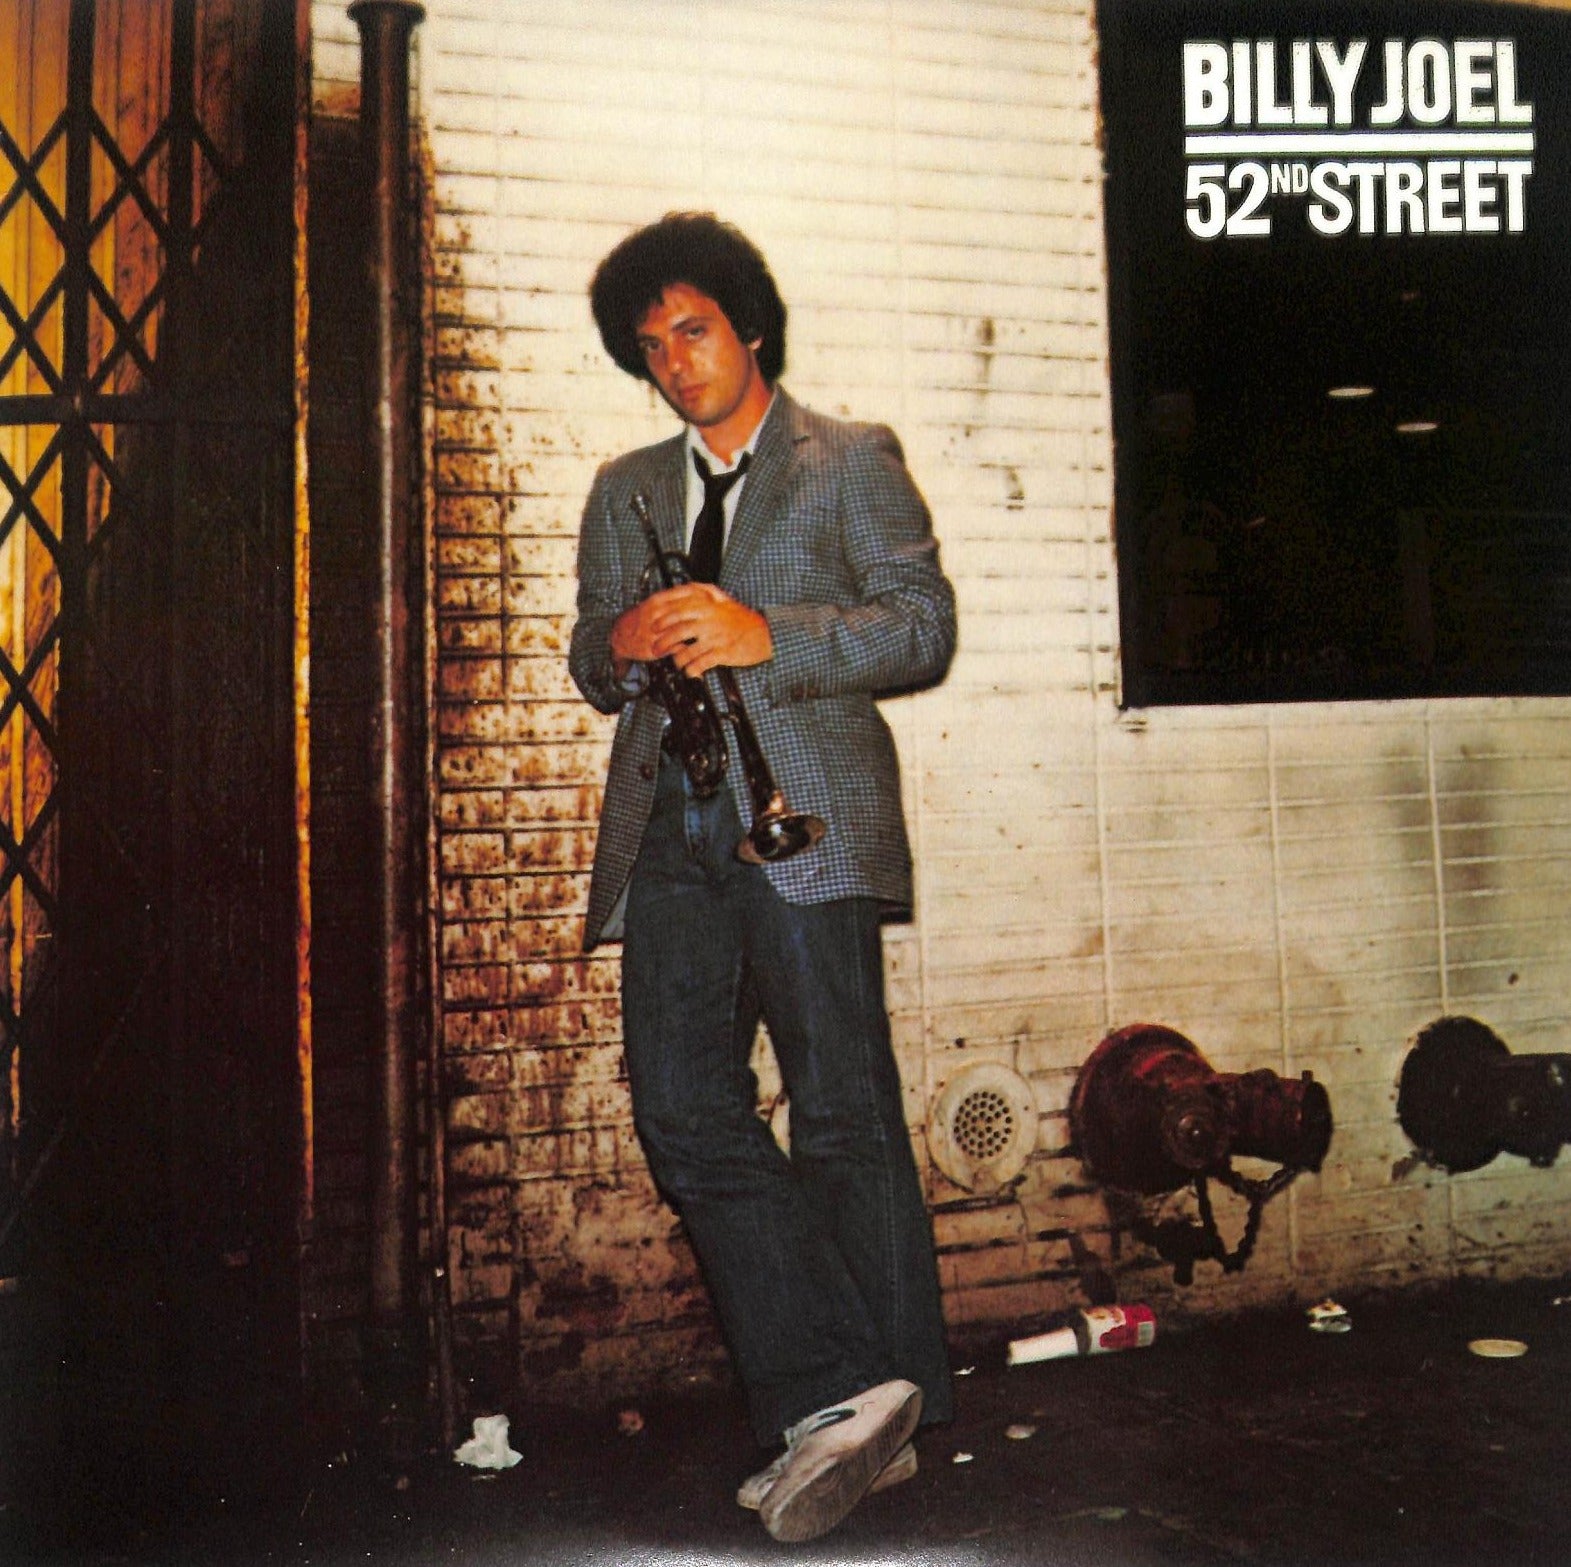 "52nd Street" is an eclectic mix of jazz, pop, and rock, reflecting the diverse cultural tapestry of New York. Standout track - "My Life," a vibrant testament to Joel's storytelling skills. The album's distinctive blend of genres captures the energetic essence of urban life, showcasing Joel's versatile musicianship and sharp lyrical wit.